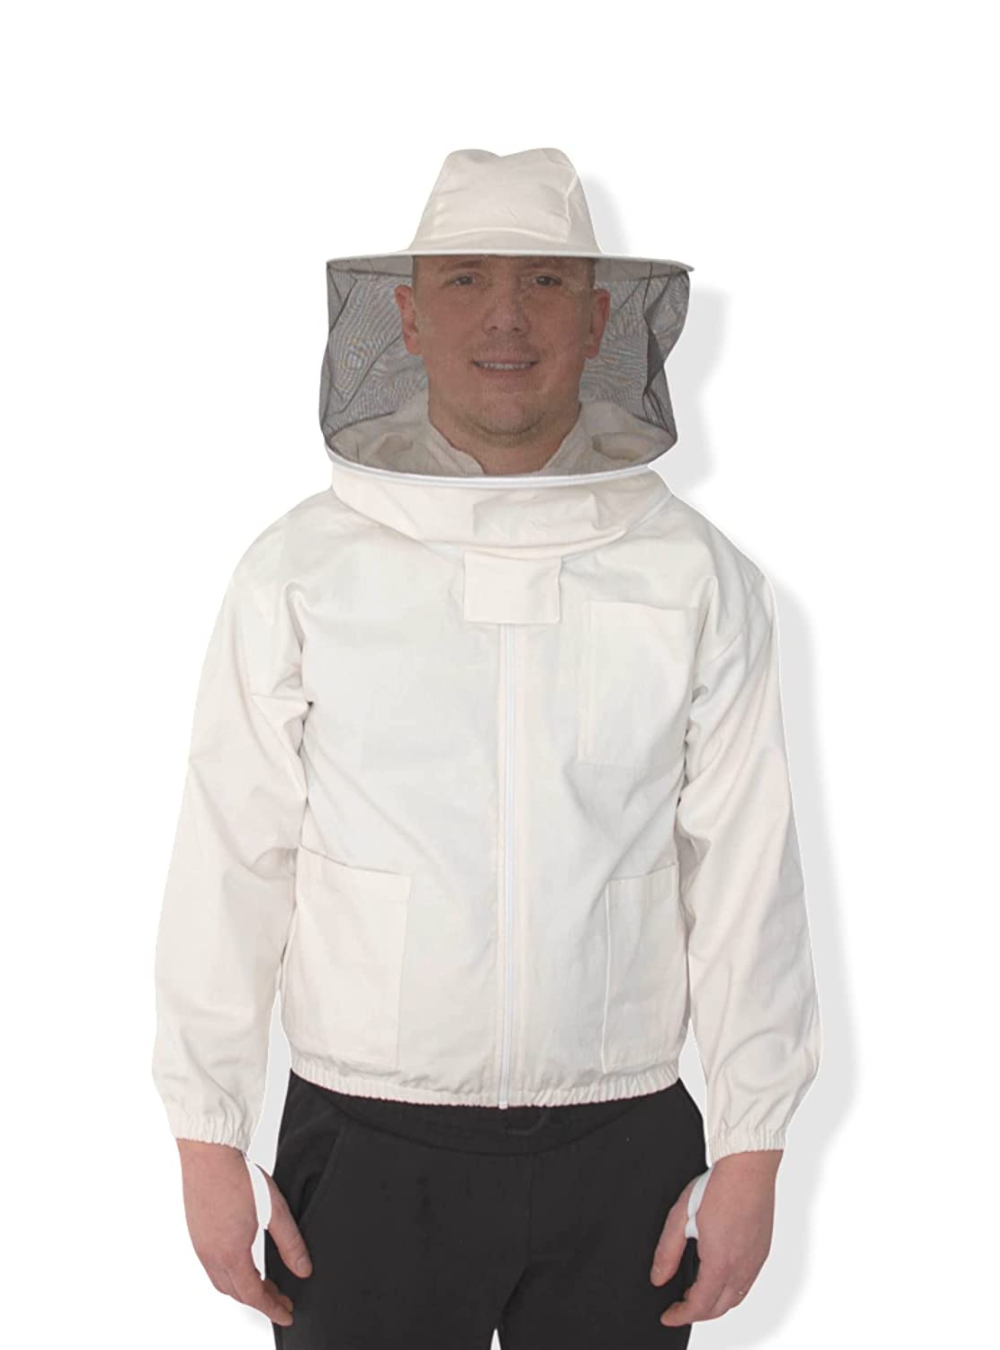 The beekeeper is wearing a vented white mesh jacket and with a Fencing Veil